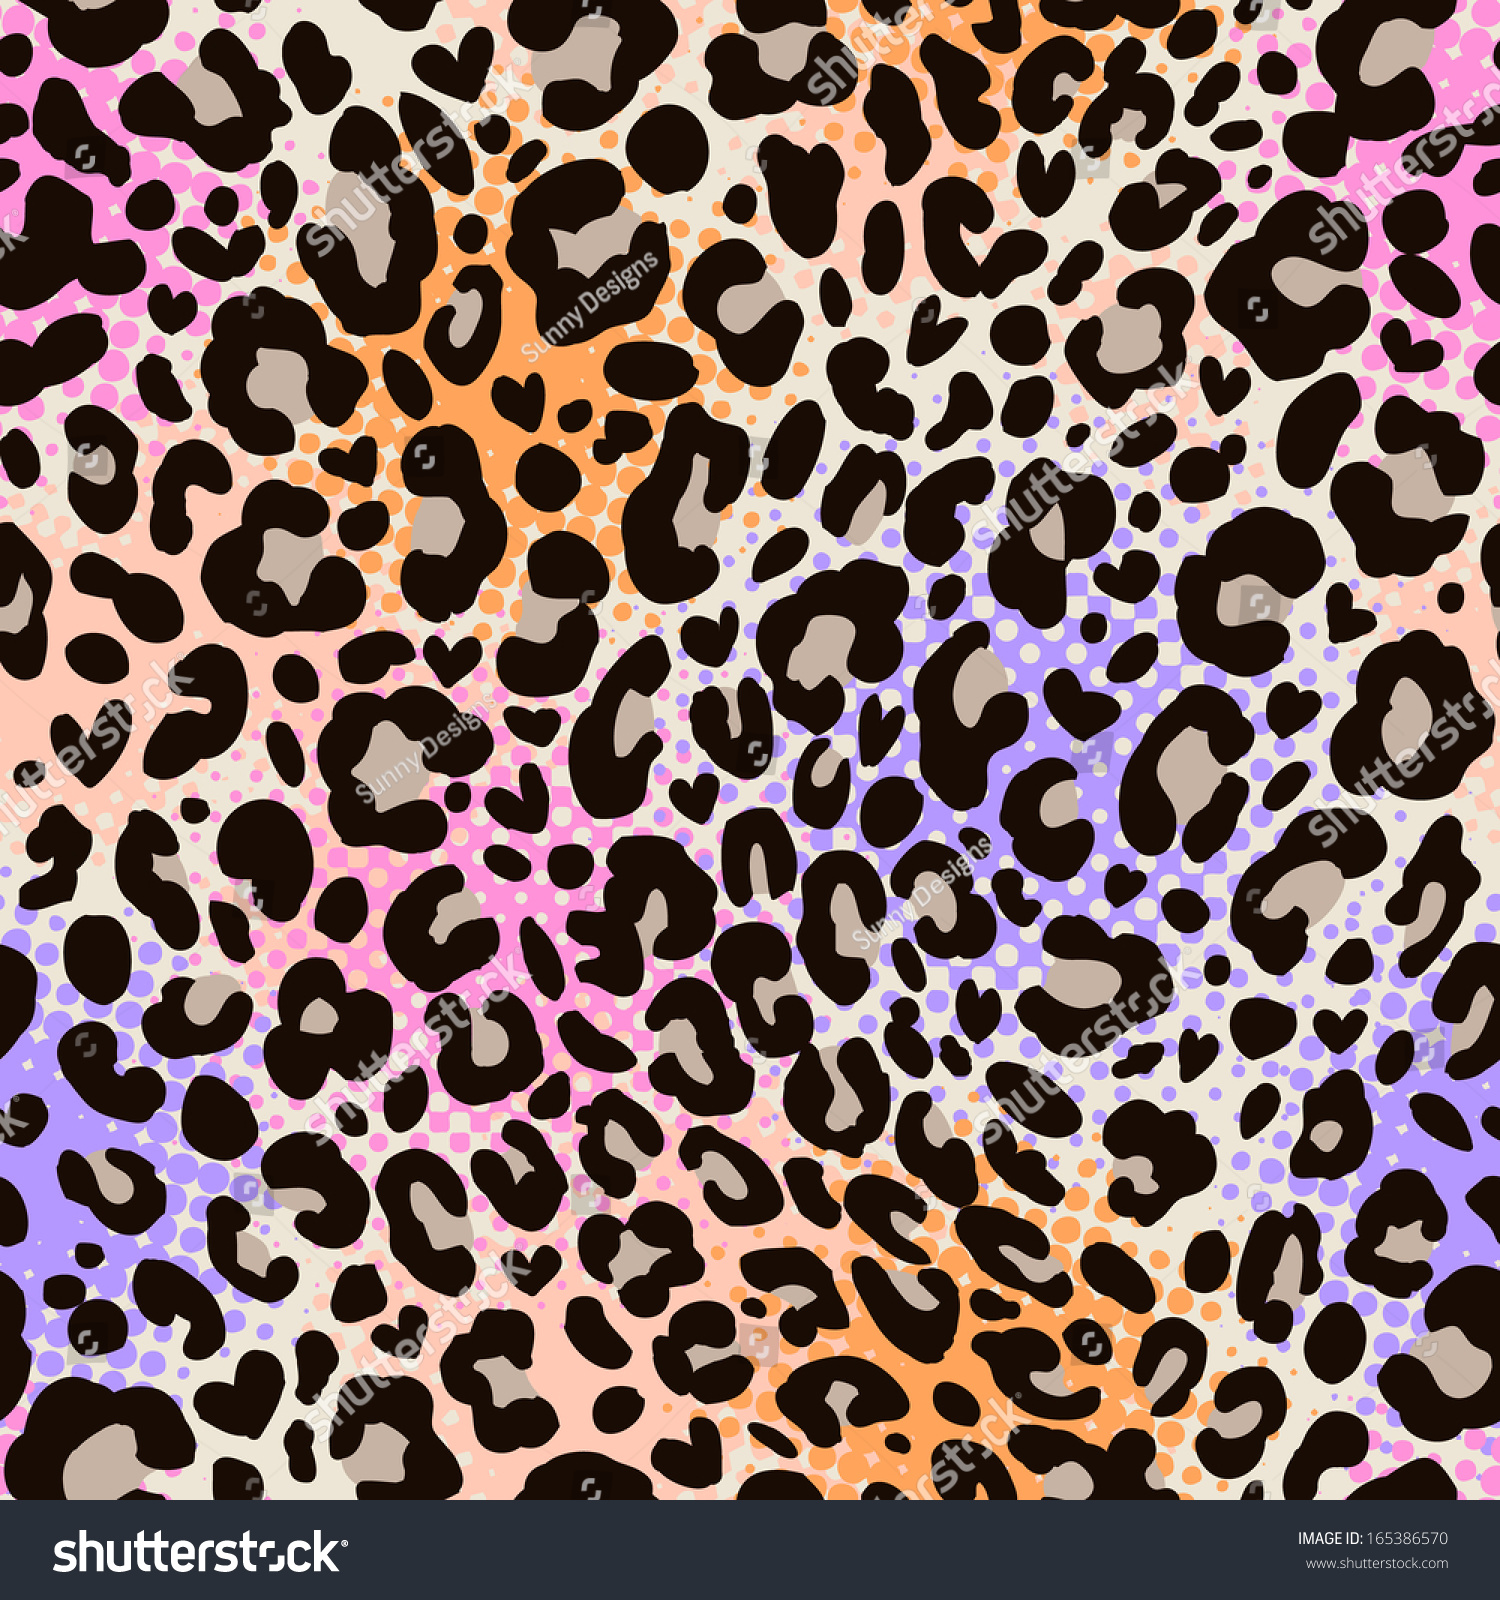 Colorful Animal Print Wallpaper / Best 57 Print Backgrounds On ...